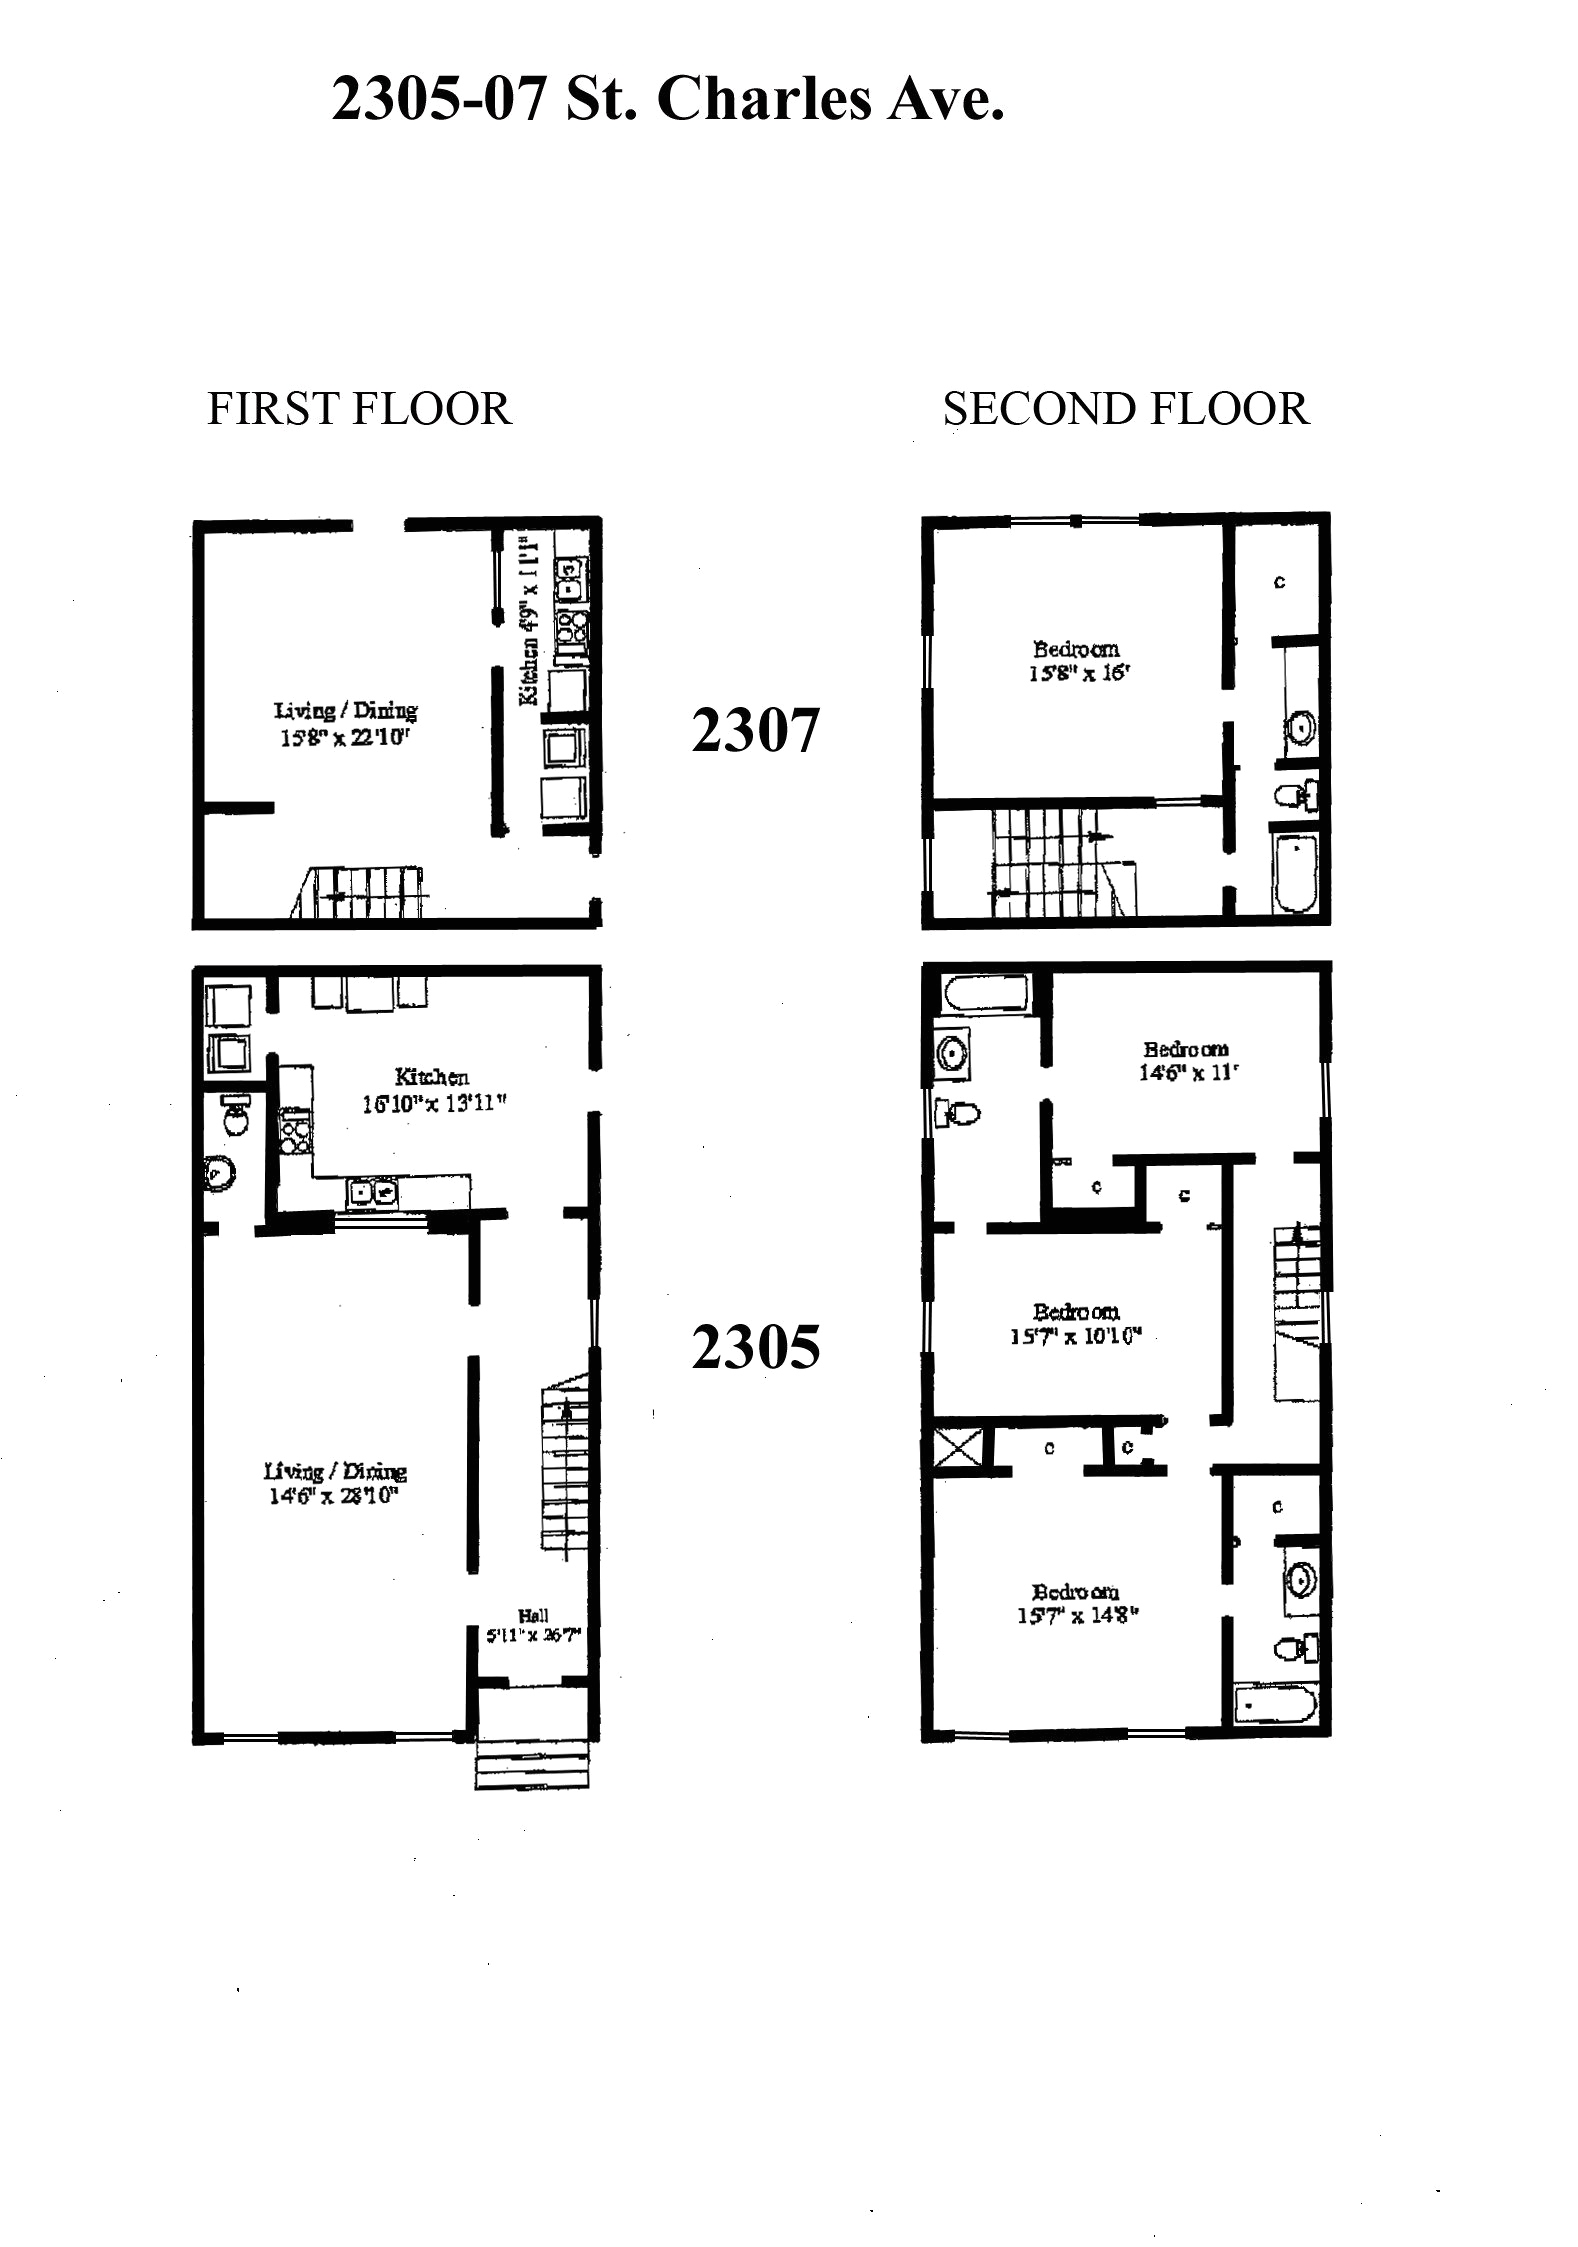 3 bedroom rv floor plan unique new orleans house floor plans architecture about od